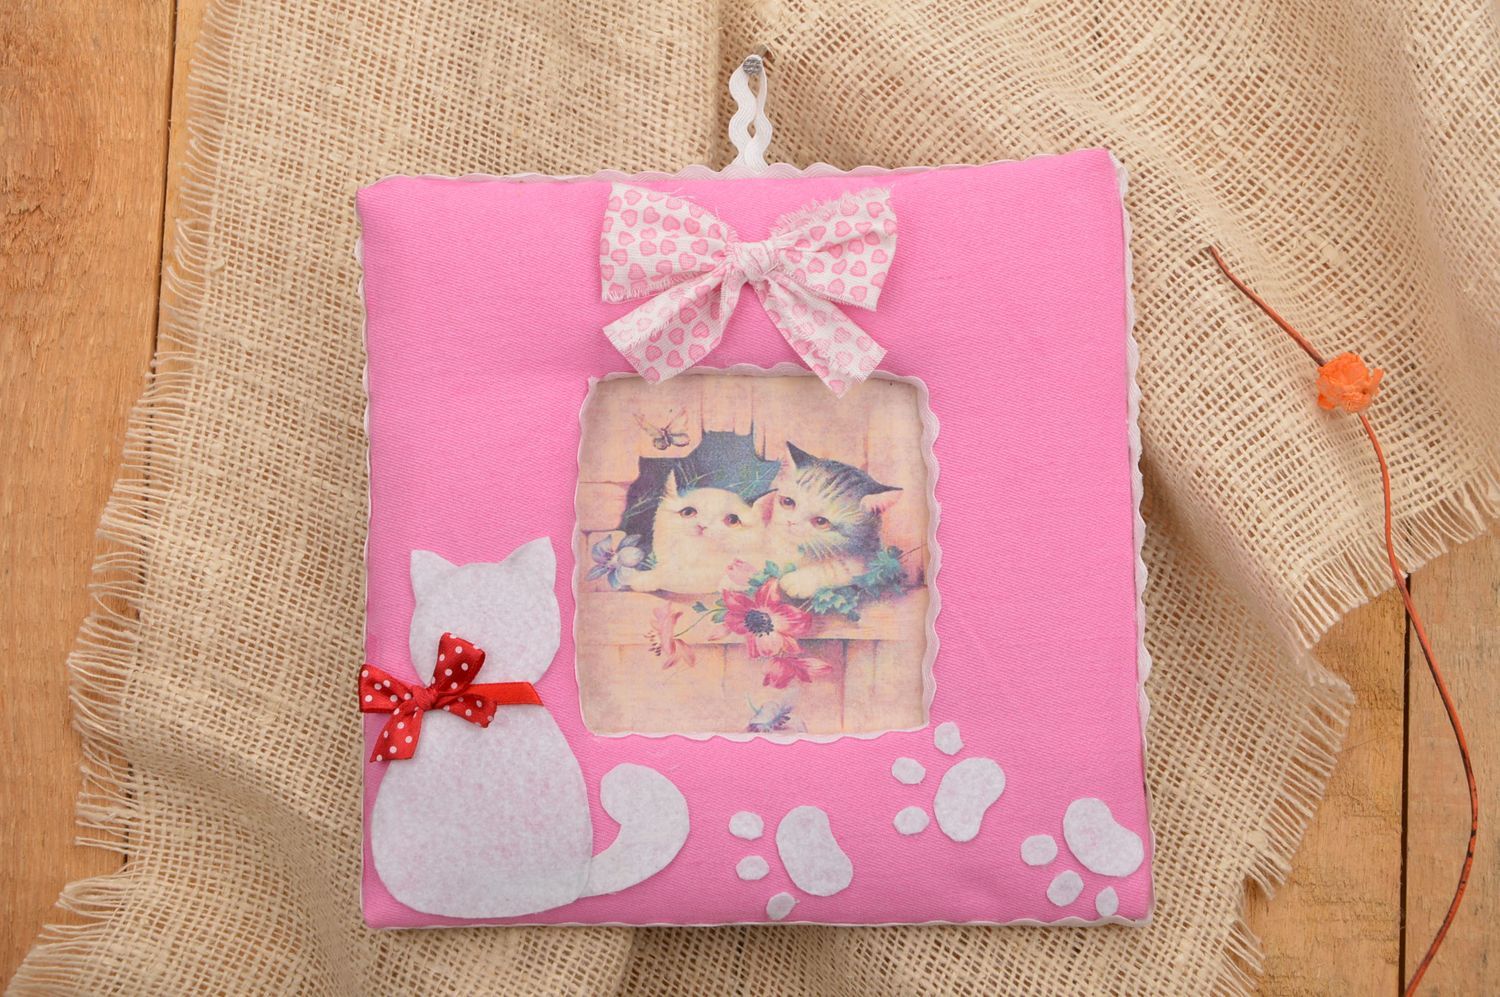 Handmade photo frame pink designer picture frame cool gift decorative use only photo 1